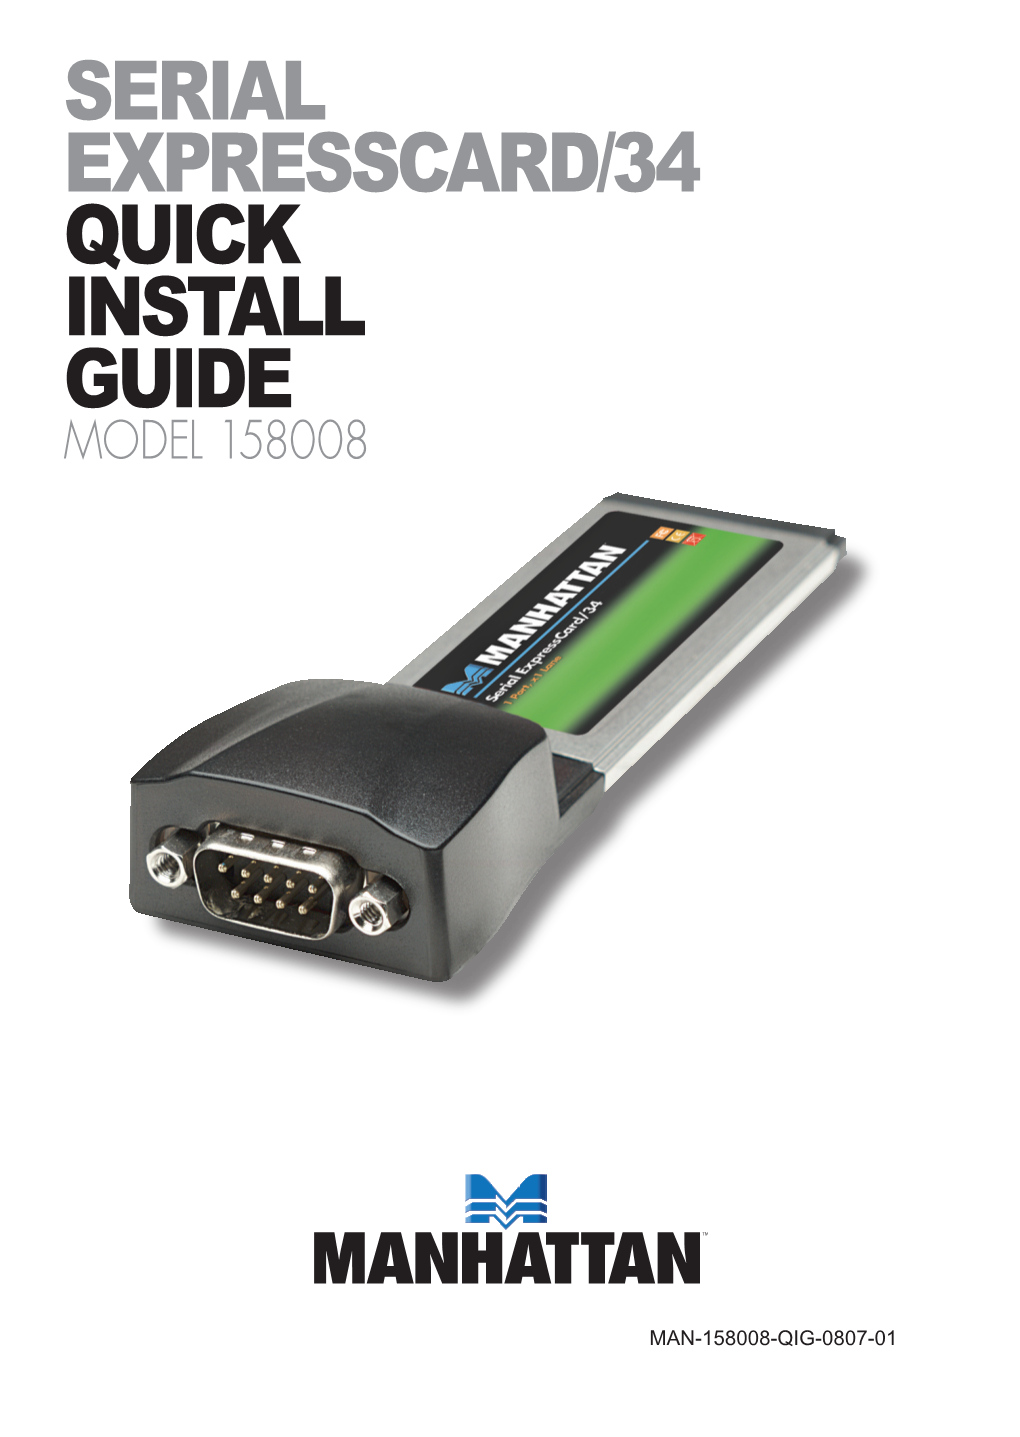 Serial Expresscard/34 Quick Install Guide Model 158008